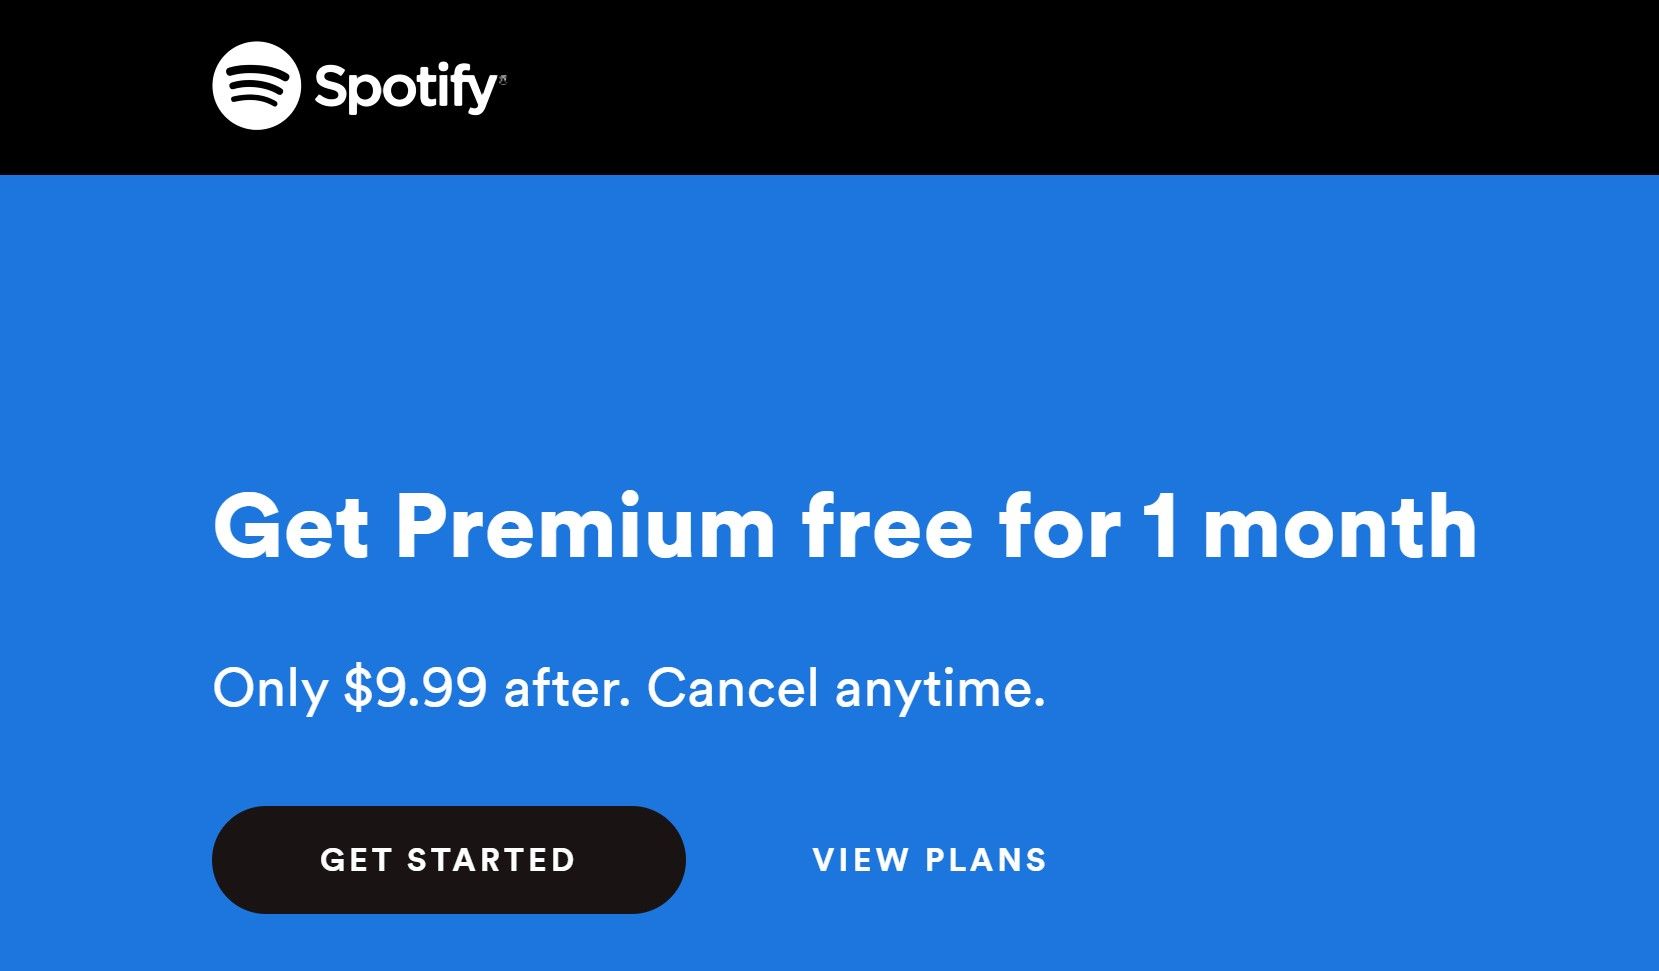 How to Trial Spotify Premium for Free (Without Getting Charged)